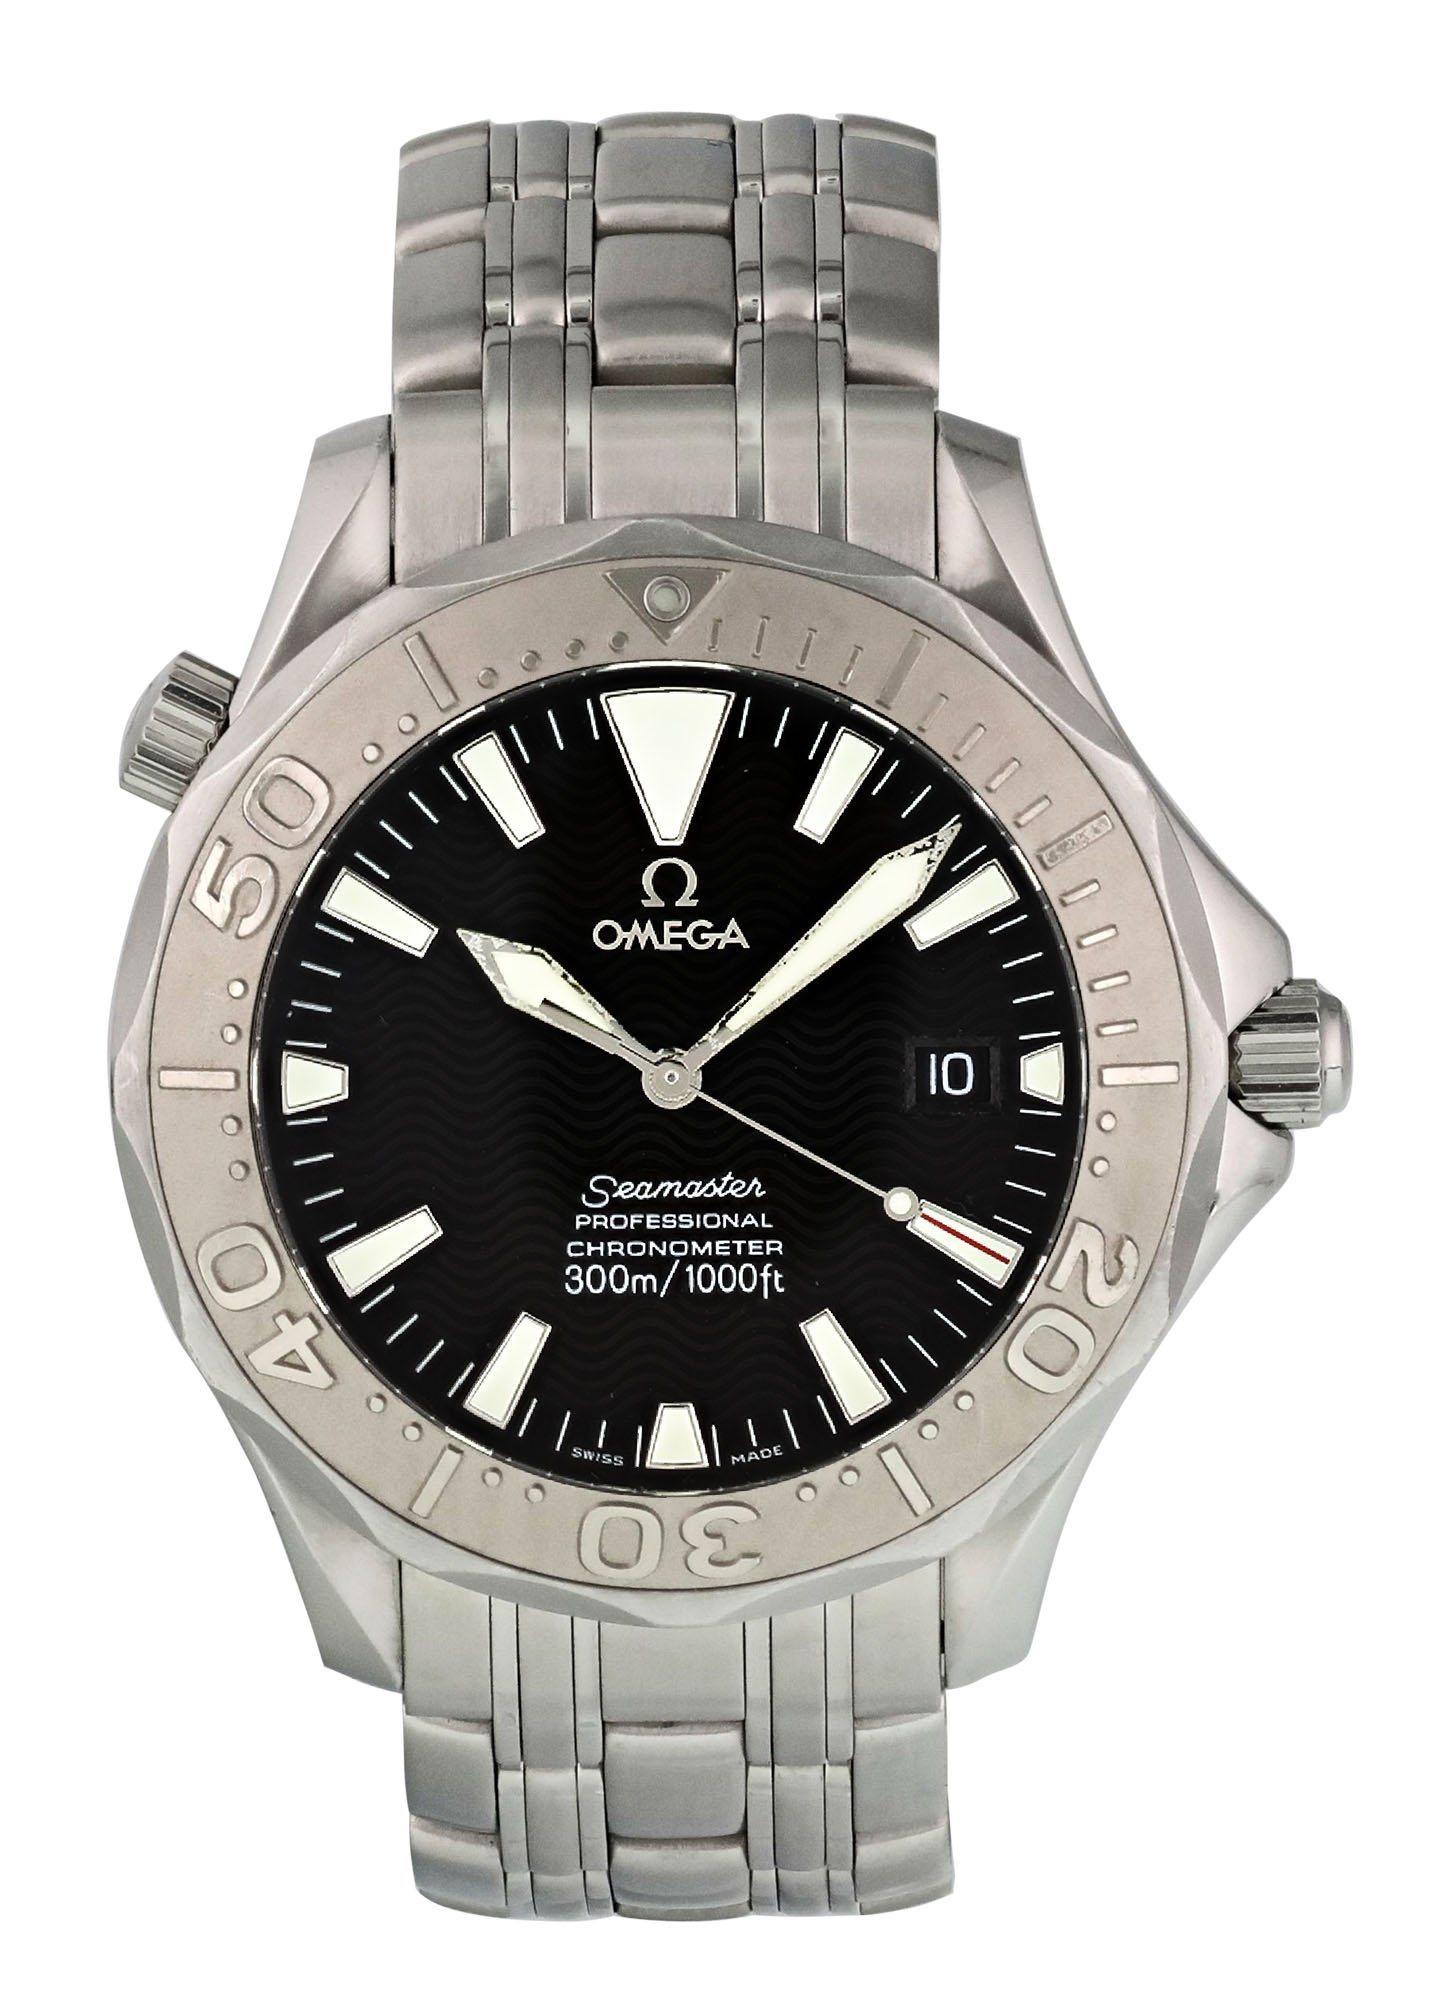 Omega Seamaster Professional 2230.50.00 Men Watch. 
41mm Stainless Steel case. 
Stainless Steel Unidirectional bezel. 
Black dial with Luminous Steel hands and index hour markers. 
Minute markers on the outer dial. 
Date display at the 3 o'clock